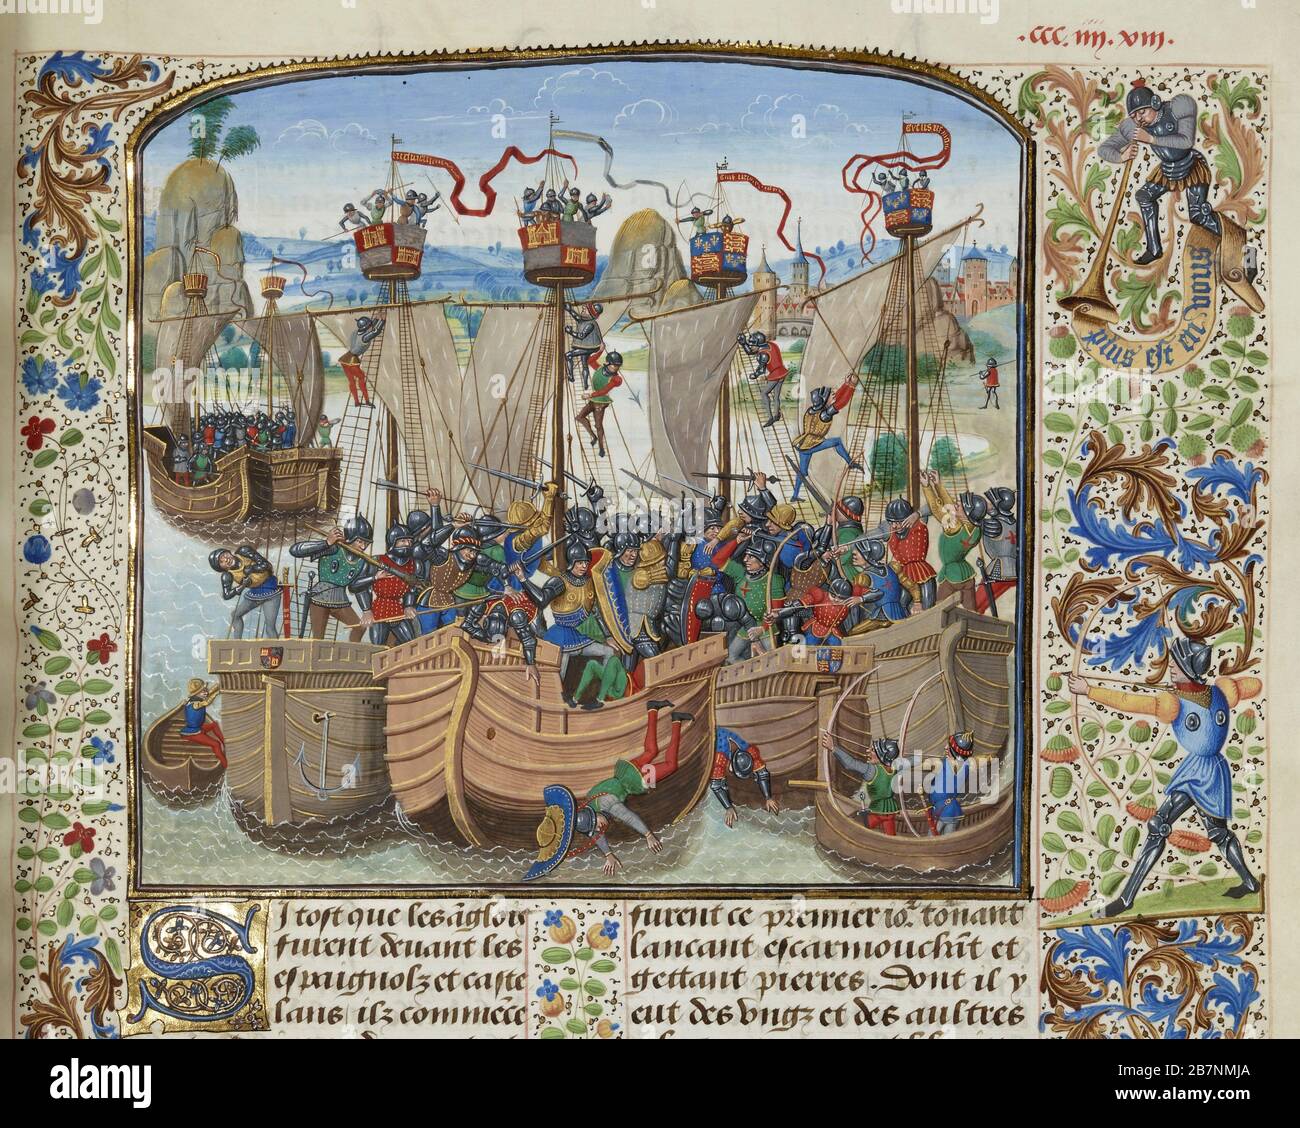 The Battle of La Rochelle, 1372 (Miniature from the Grandes Chroniques de France by Jean Froissart), ca 1470-1475. Found in the Collection of Biblioth&#xe8;que Nationale de France. Stock Photo